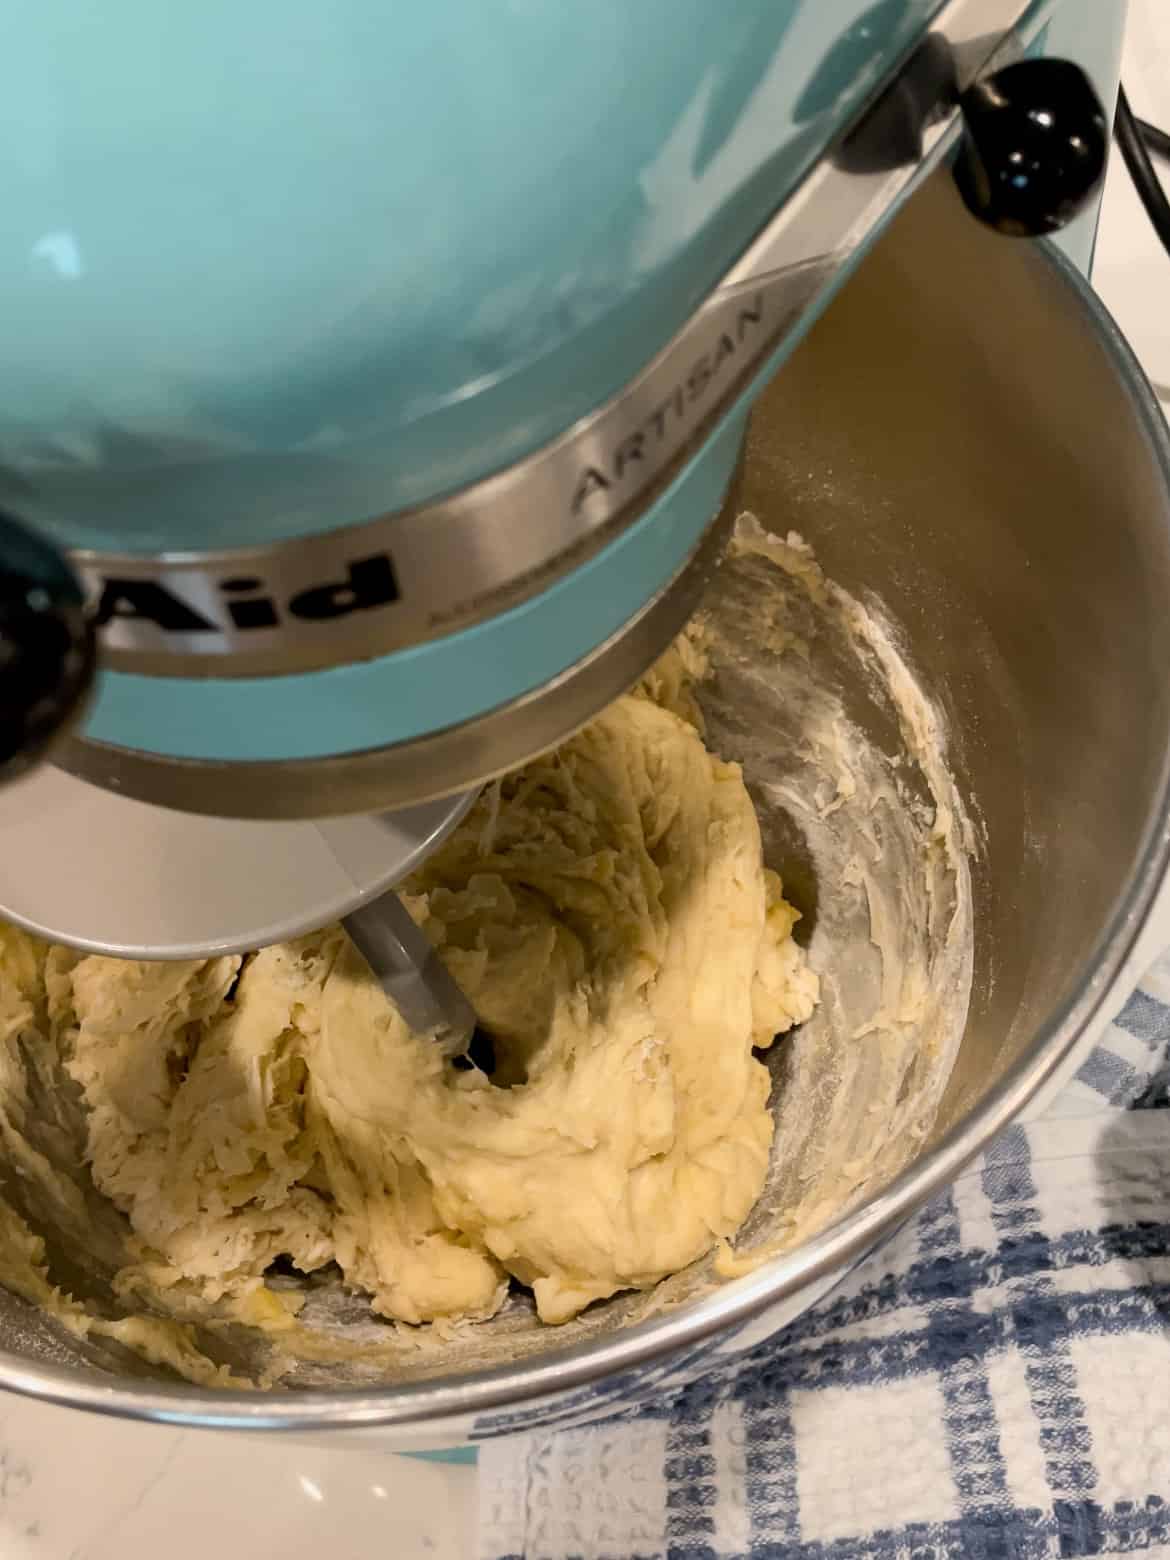 ingredients for homemade pizza dough have been loosely mixed into the bowl of a stand mixer.